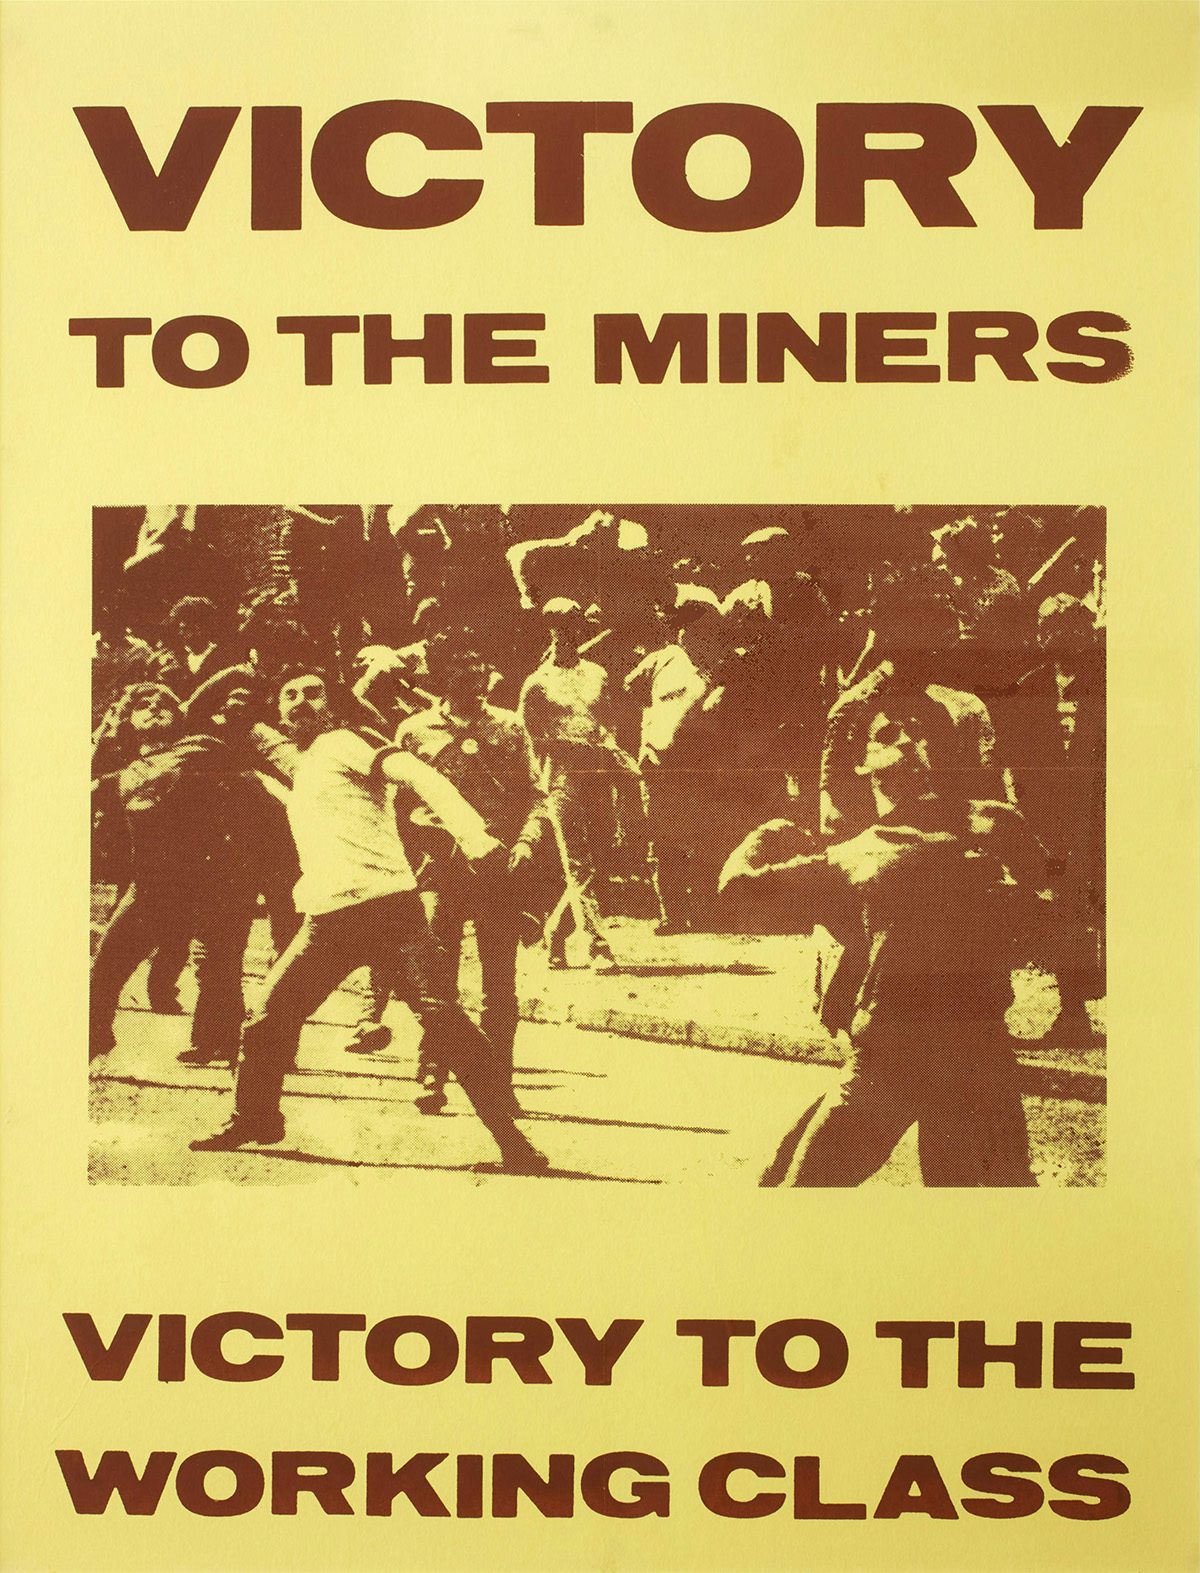 Image shows a yellow poster that reads 'Victory to the miners' at the top, an image of protestors appearing to throw objects in the middle, and the phrase 'victory to the working class' at the bottom